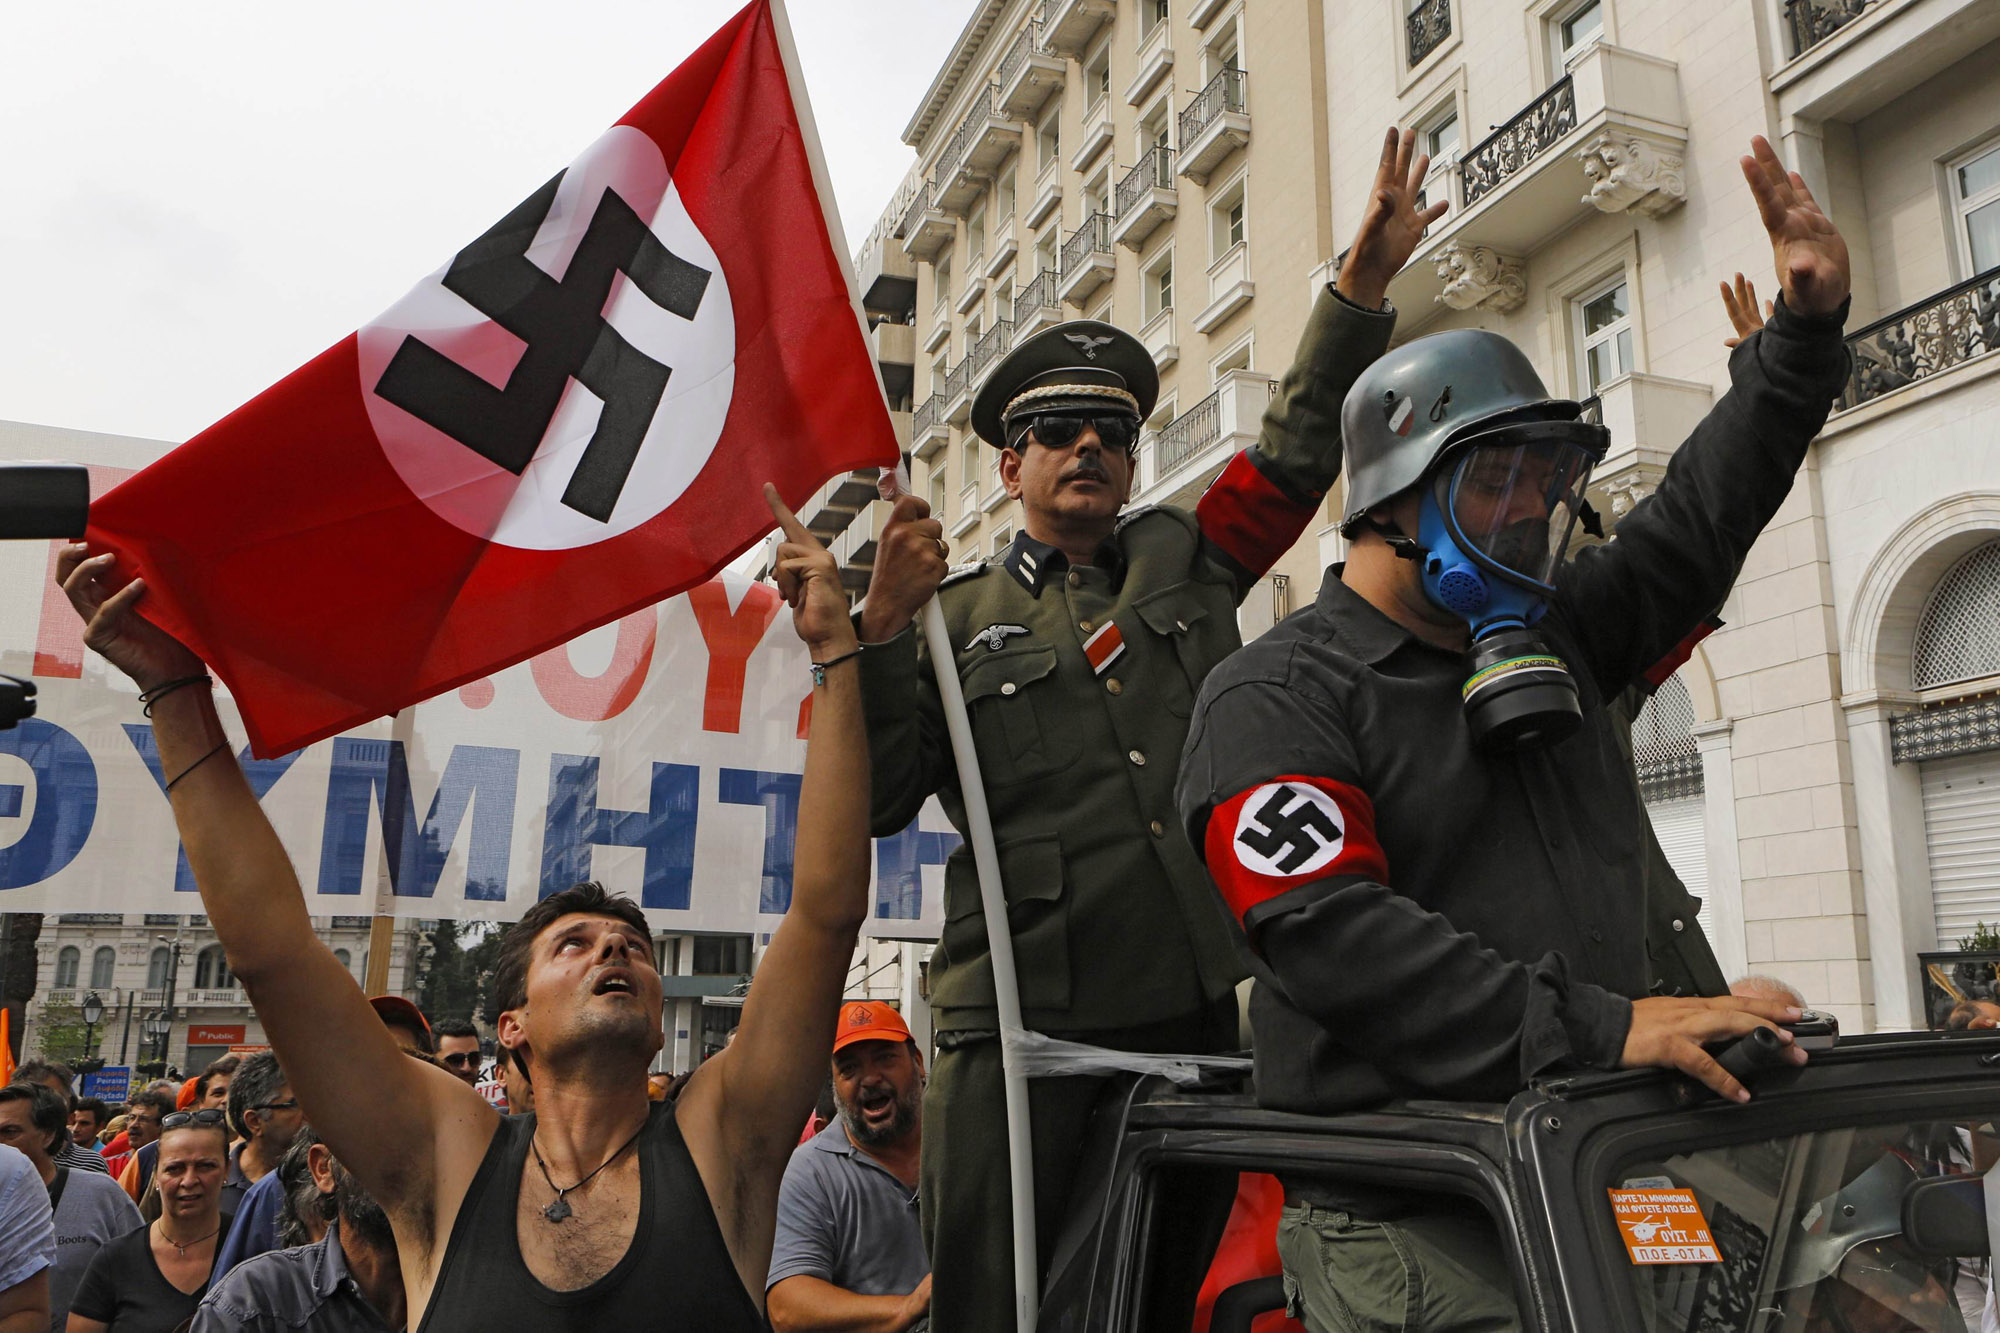 File picture shows demonstrators dressed as Nazis and waving a swastika flag as they ride in an open-top car in Syntagma Square in Athens as they protest against the visit of Germany's Chancellor Angela Merkel